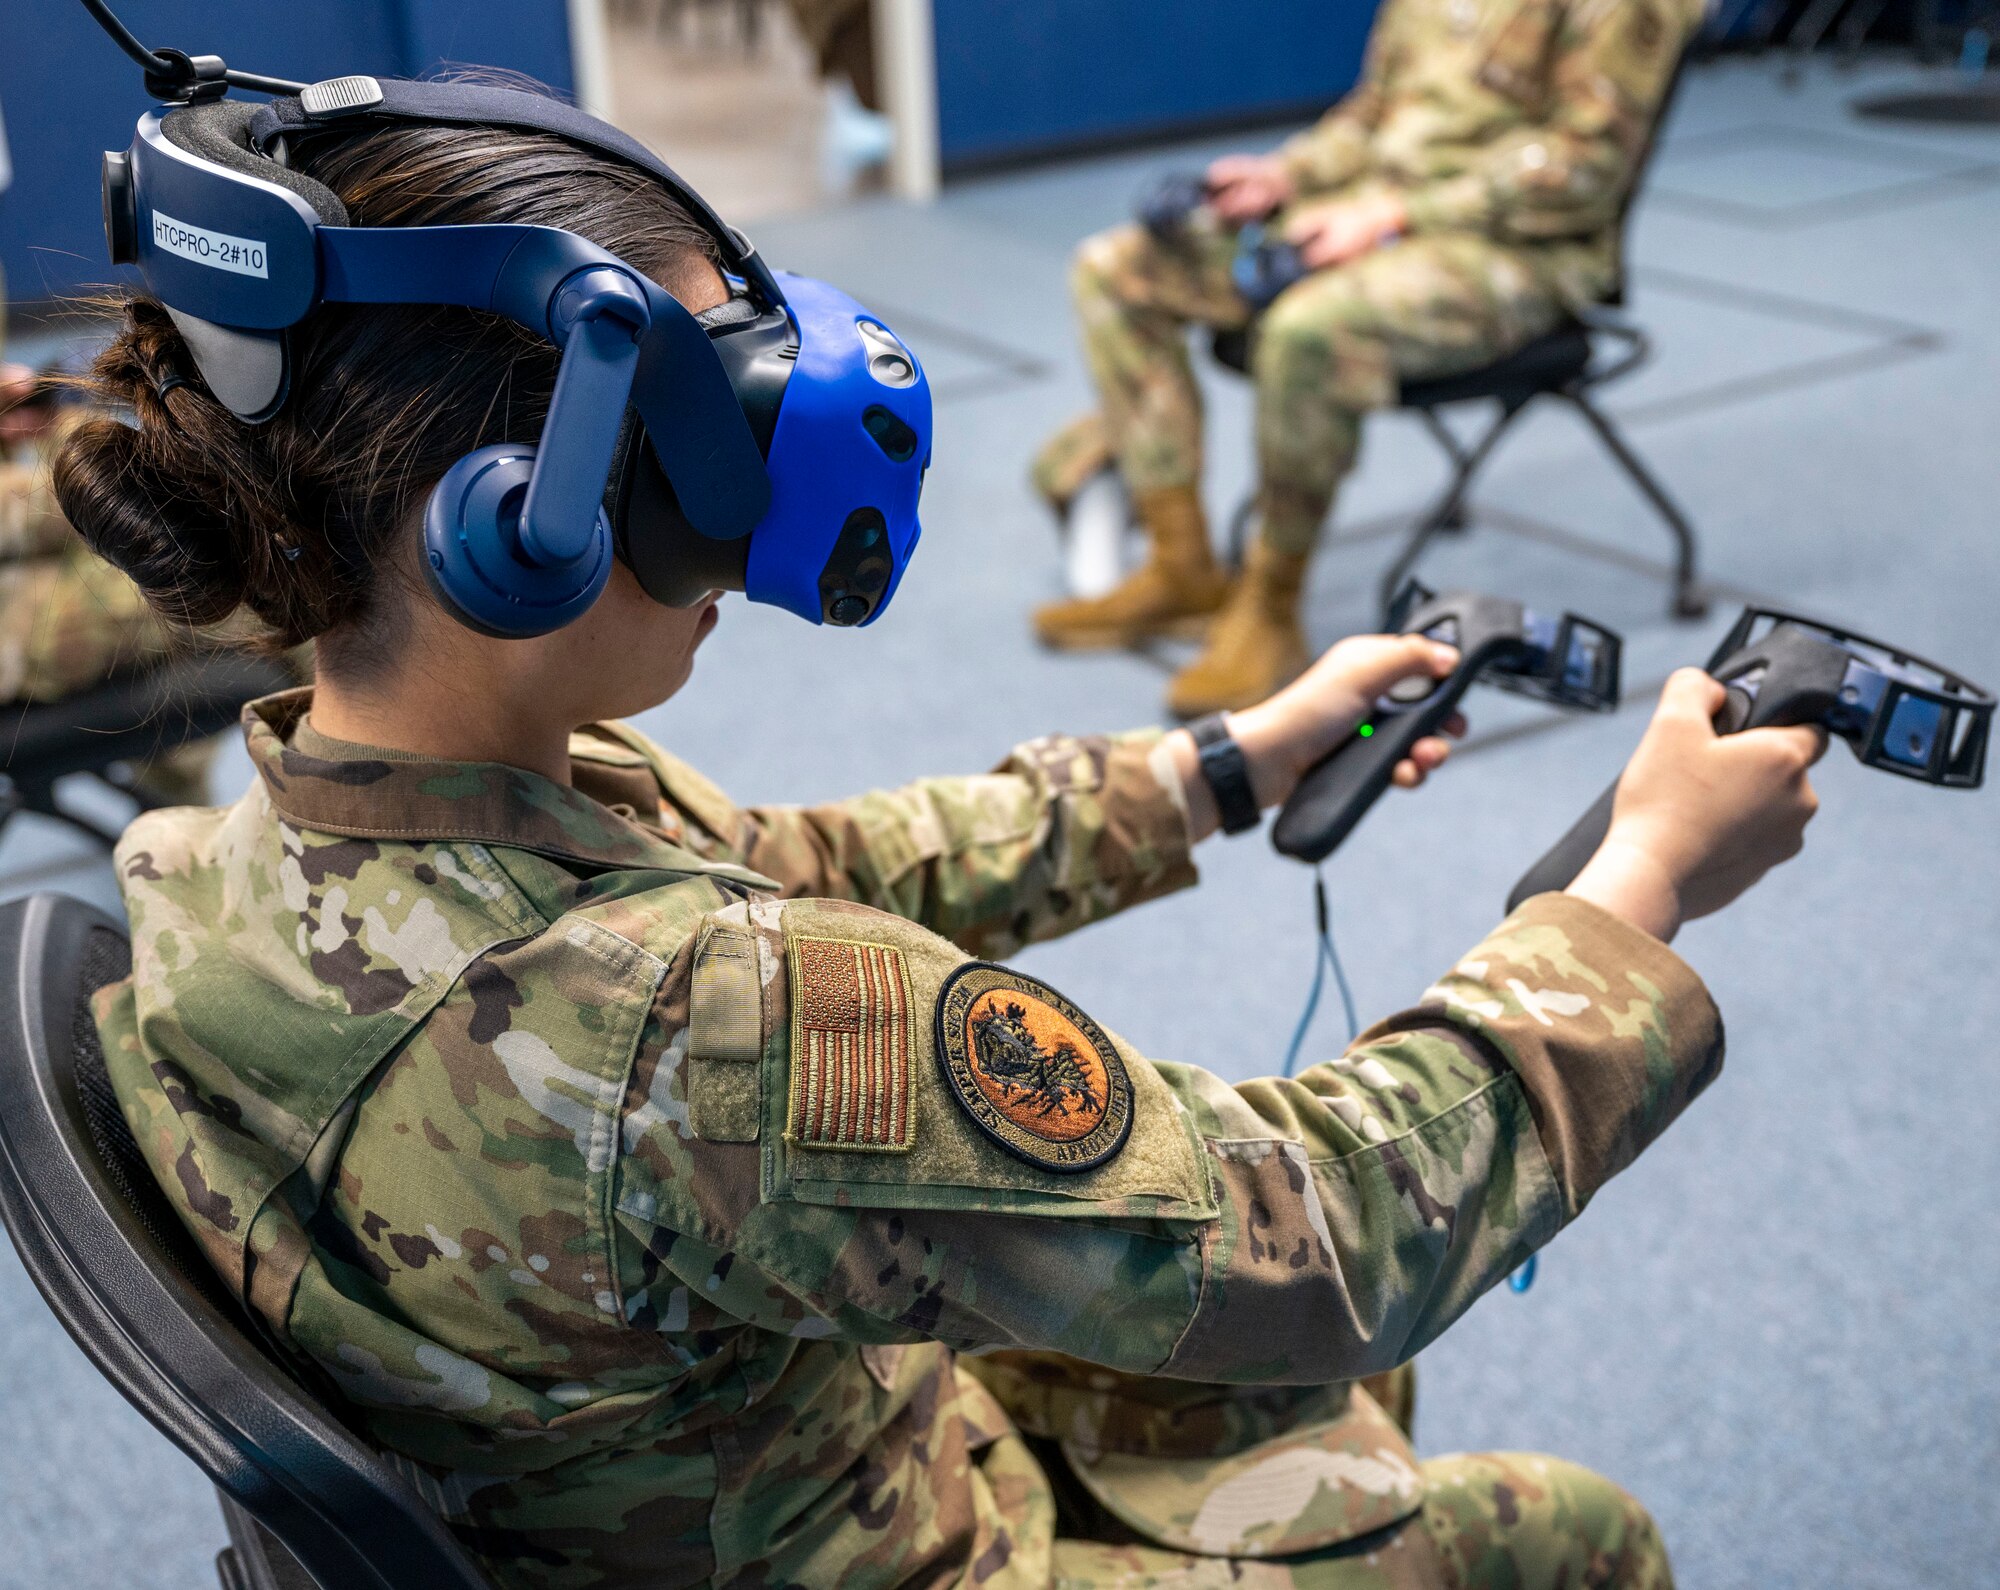 A student from Baylor University explores a simulated C-130J Super Hercules with virtual reality equipment at Dyess Air Force Base, Texas, Apr. 6, 2023. The group was immersed in the base’s daily operations while experiencing a simulation flight with the B-1B Lancer, orientation flight on the C-130J Super Hercules and a career panel with several company grade officers from various job specialties. (U.S. Air Force photo by Staff Sgt. Breanna Diaz)